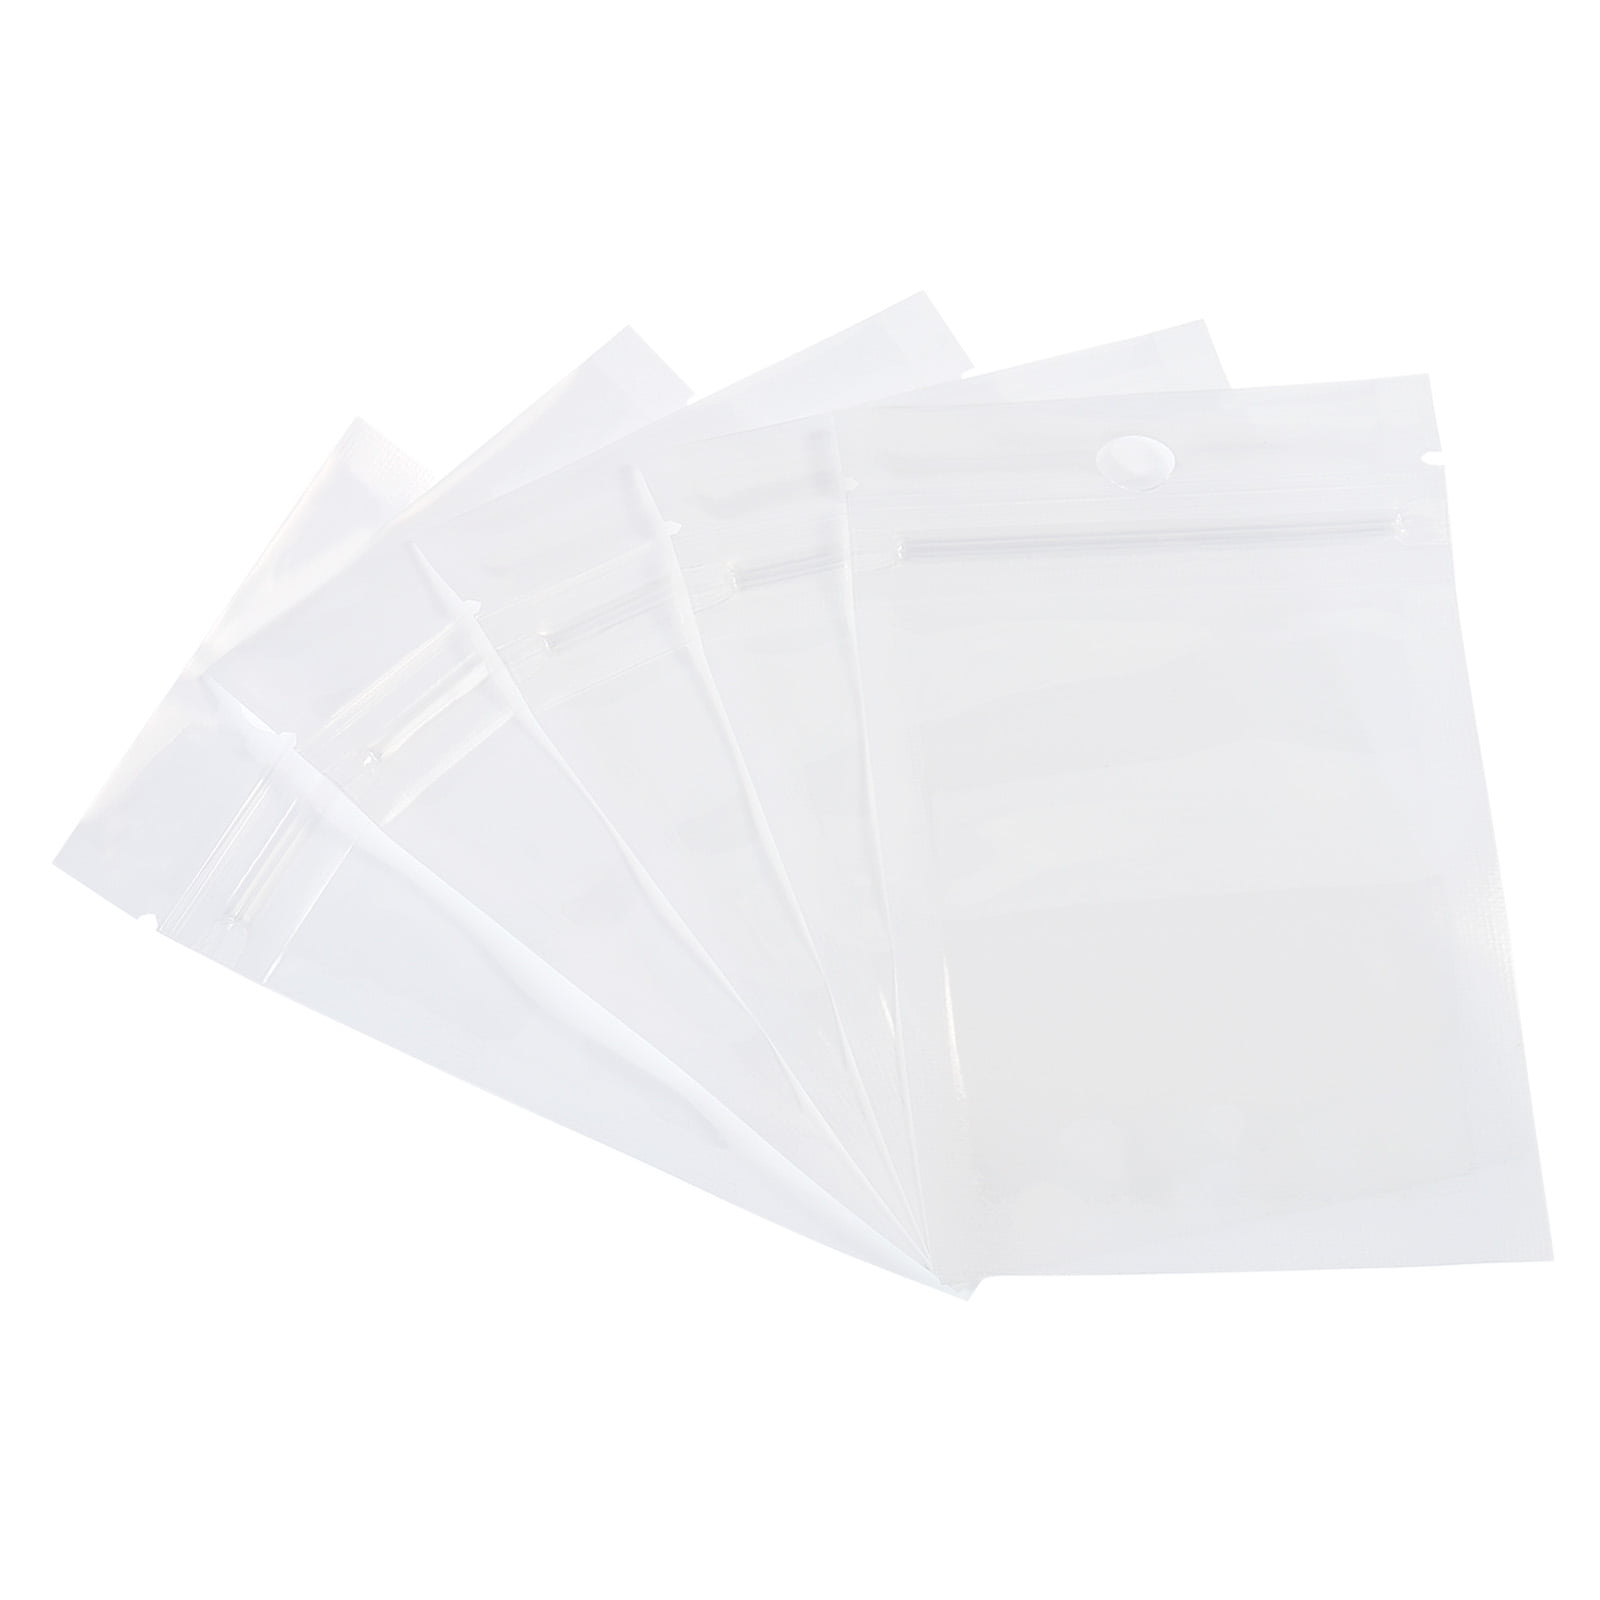 100pcs Small Transparent Plastic Candy Bag Pouch Self-adhesive Cellophane  Bags Packaging Bag Cookie Sandwich Chocolates Beads Jewelry Gift(1015cm)